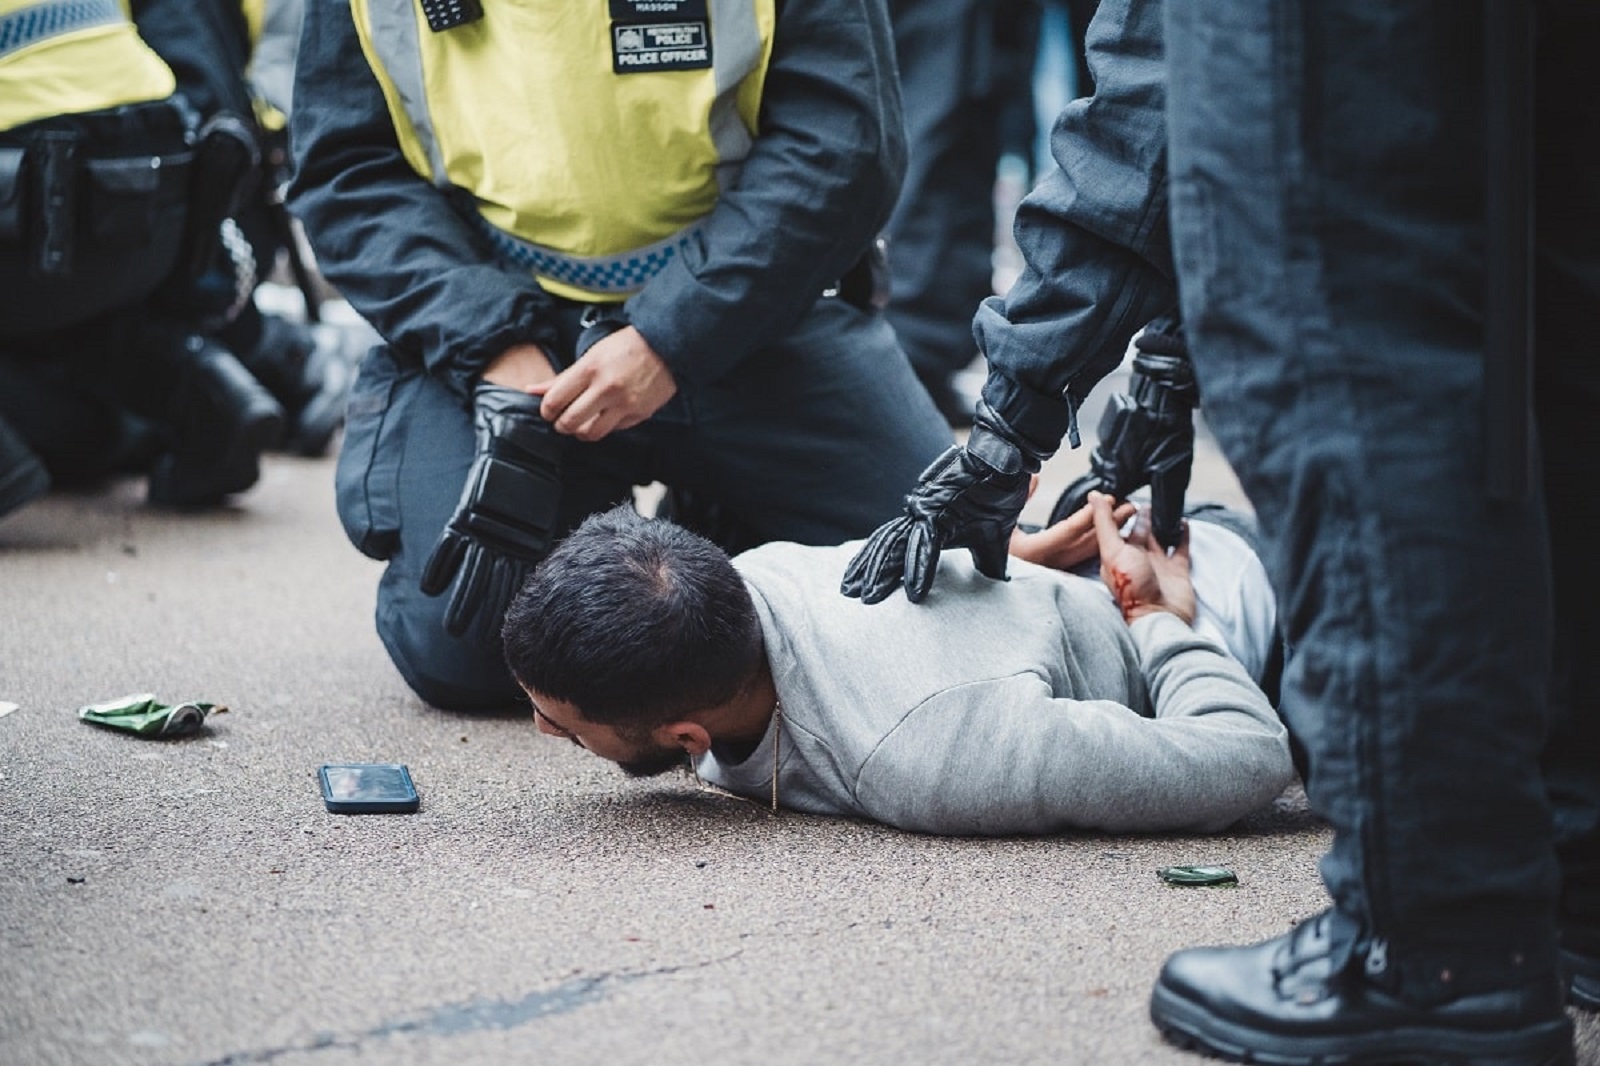 Image Credit: Shutterstock / Sandor Szmutko <p><span>Superior officers would later claim that the five soldiers used “excessive force” when apprehending the man. </span></p>